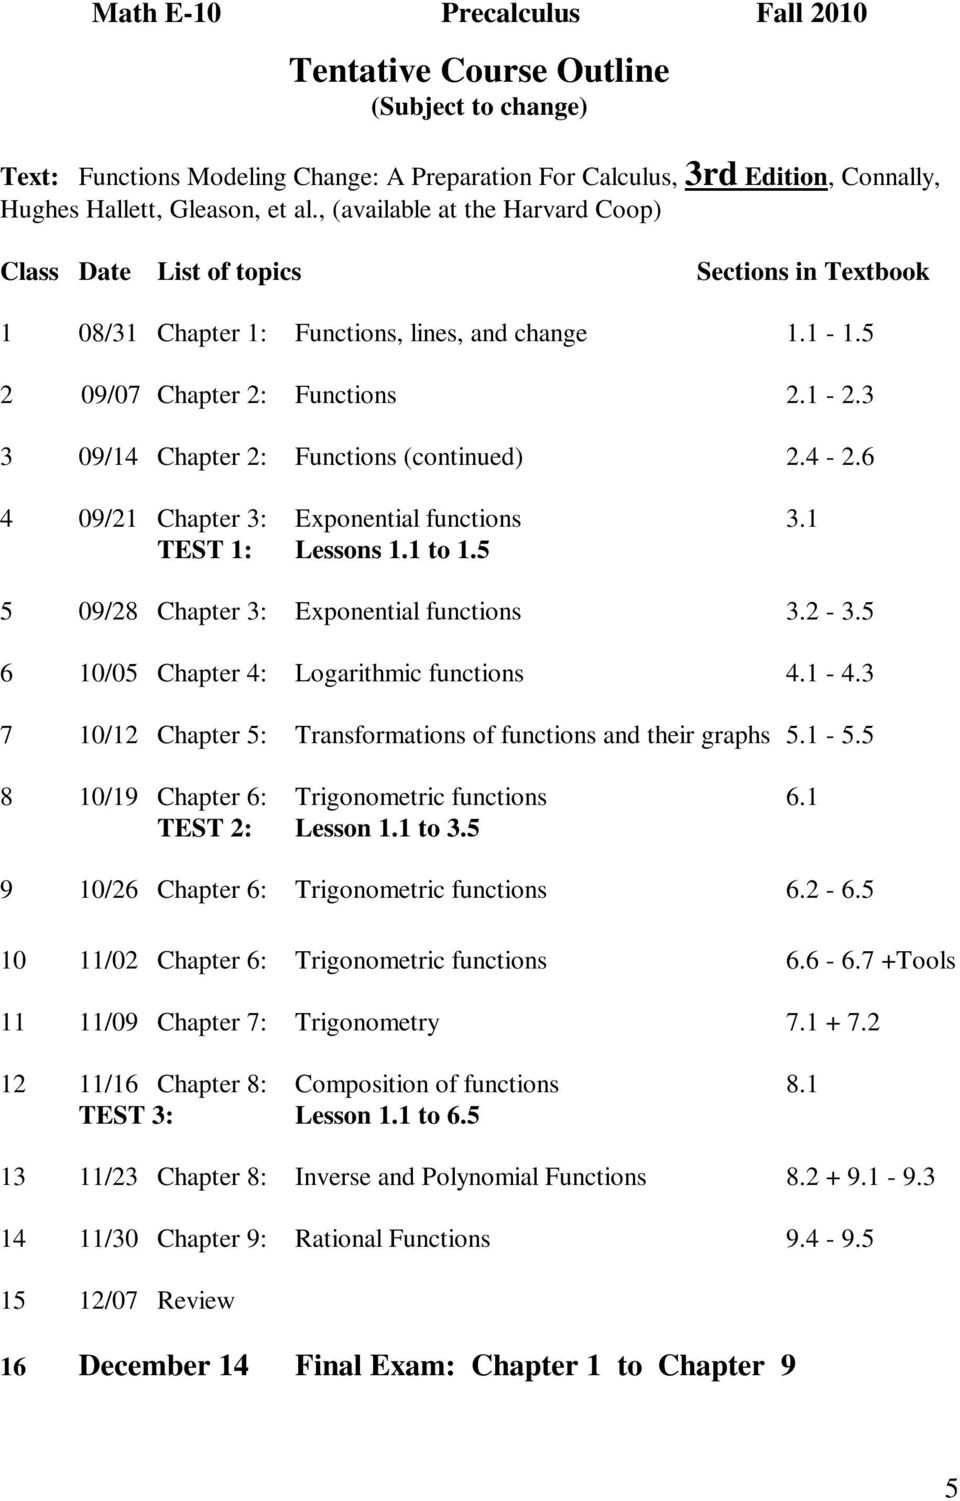 3 3 09/14 Chapter 2: Functions (continued) 2.4-2.6 4 09/21 Chapter 3: Exponential functions 3.1 TEST 1: Lessons 1.1 to 1.5 5 09/28 Chapter 3: Exponential functions 3.2-3.